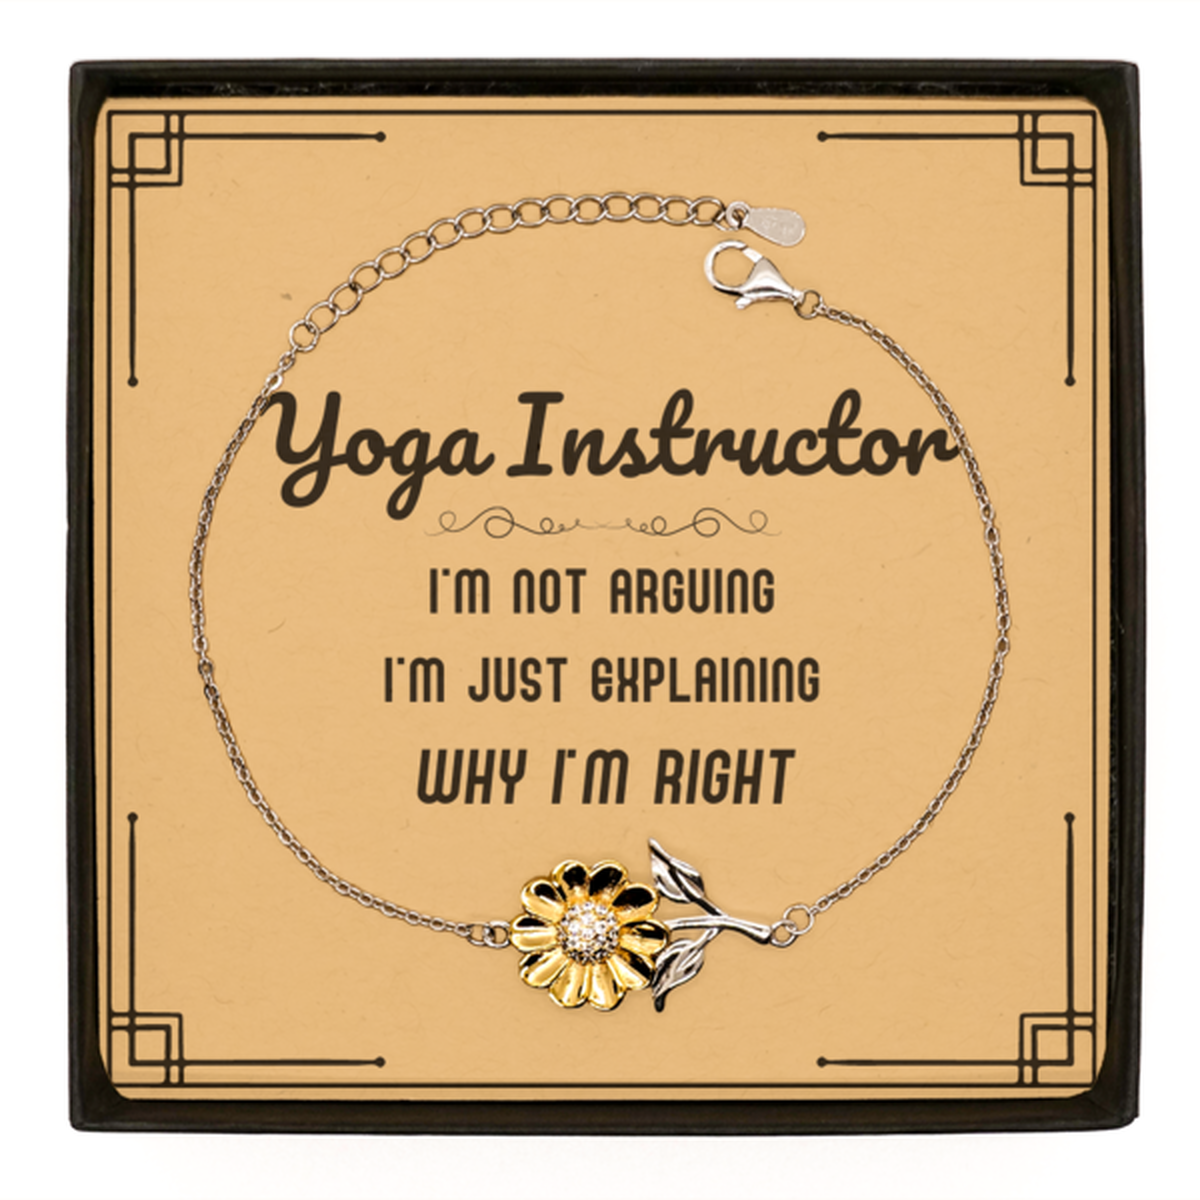 Yoga Instructor I'm not Arguing. I'm Just Explaining Why I'm RIGHT Sunflower Bracelet, Funny Saying Quote Yoga Instructor Gifts For Yoga Instructor Message Card Graduation Birthday Christmas Gifts for Men Women Coworker